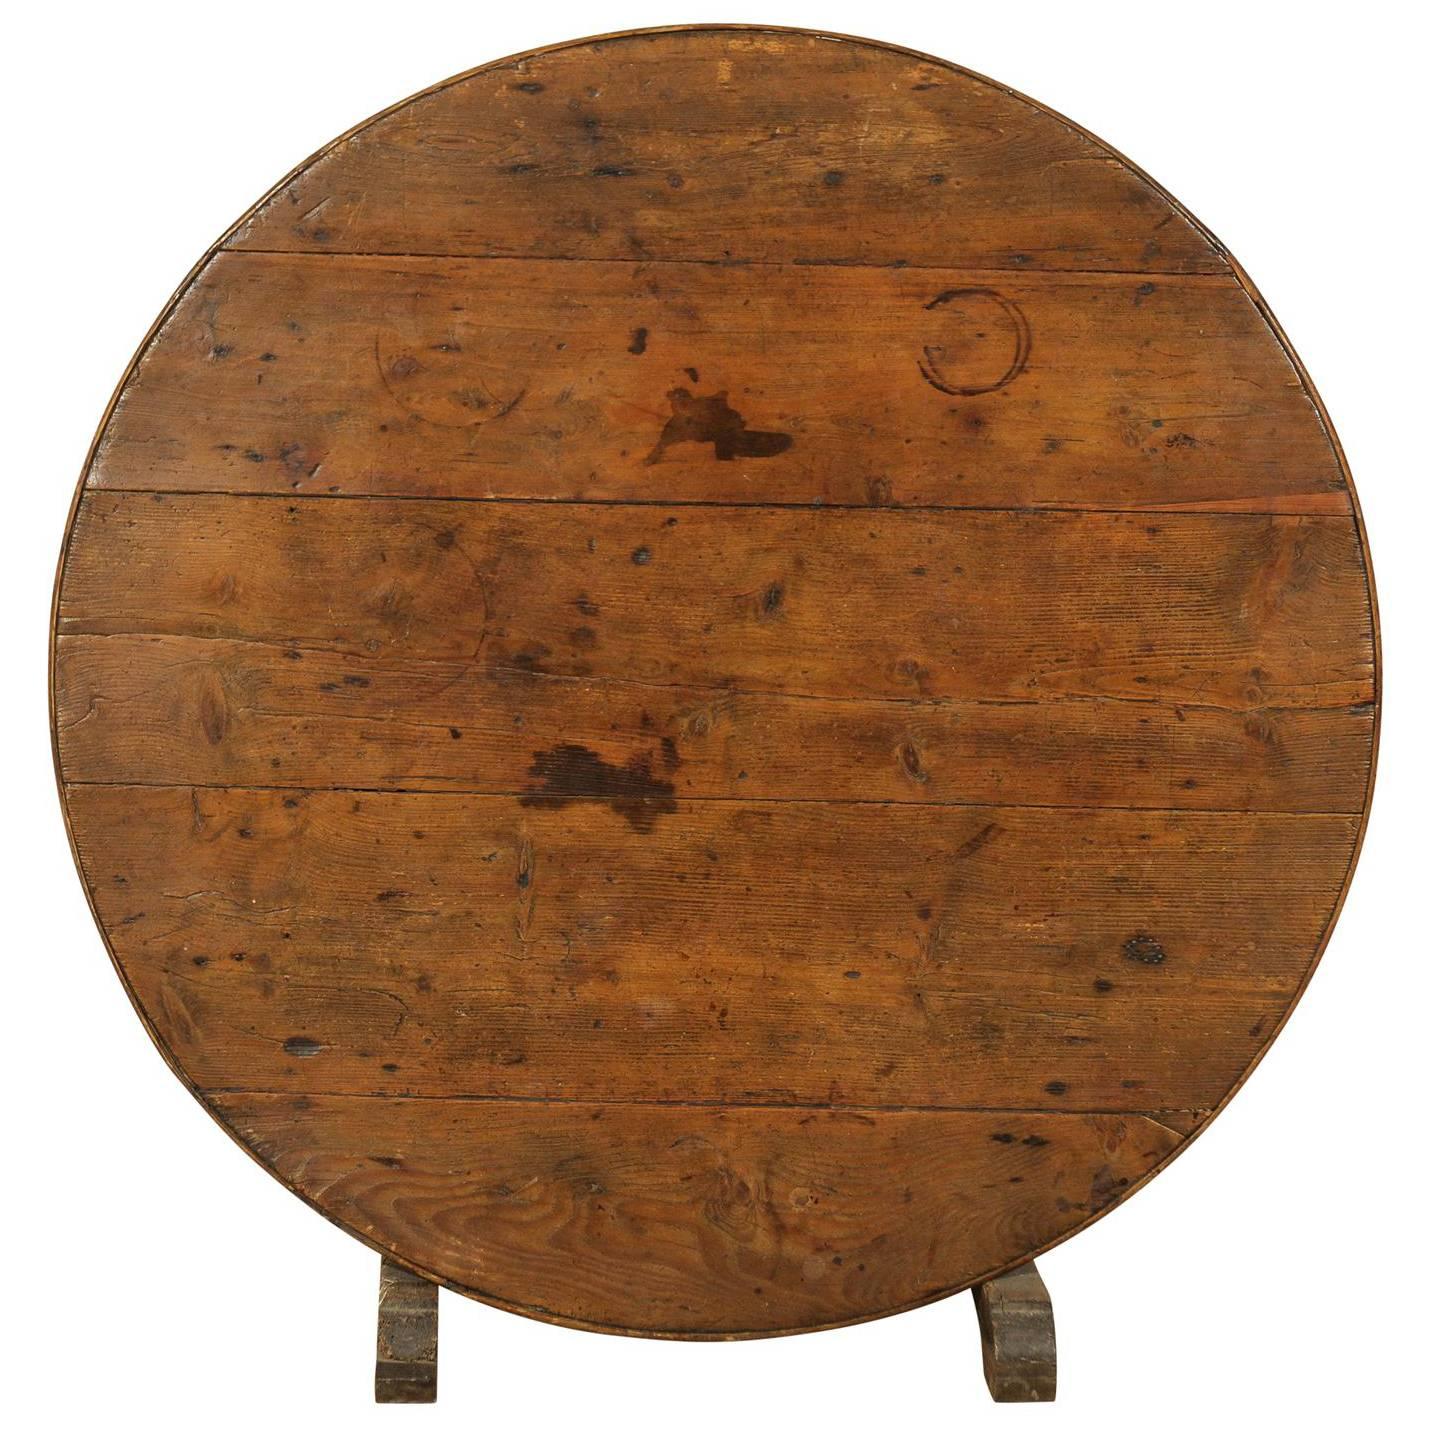 A French Wine Tasting Table with Medium Size, Round Shape  and Nice Patina